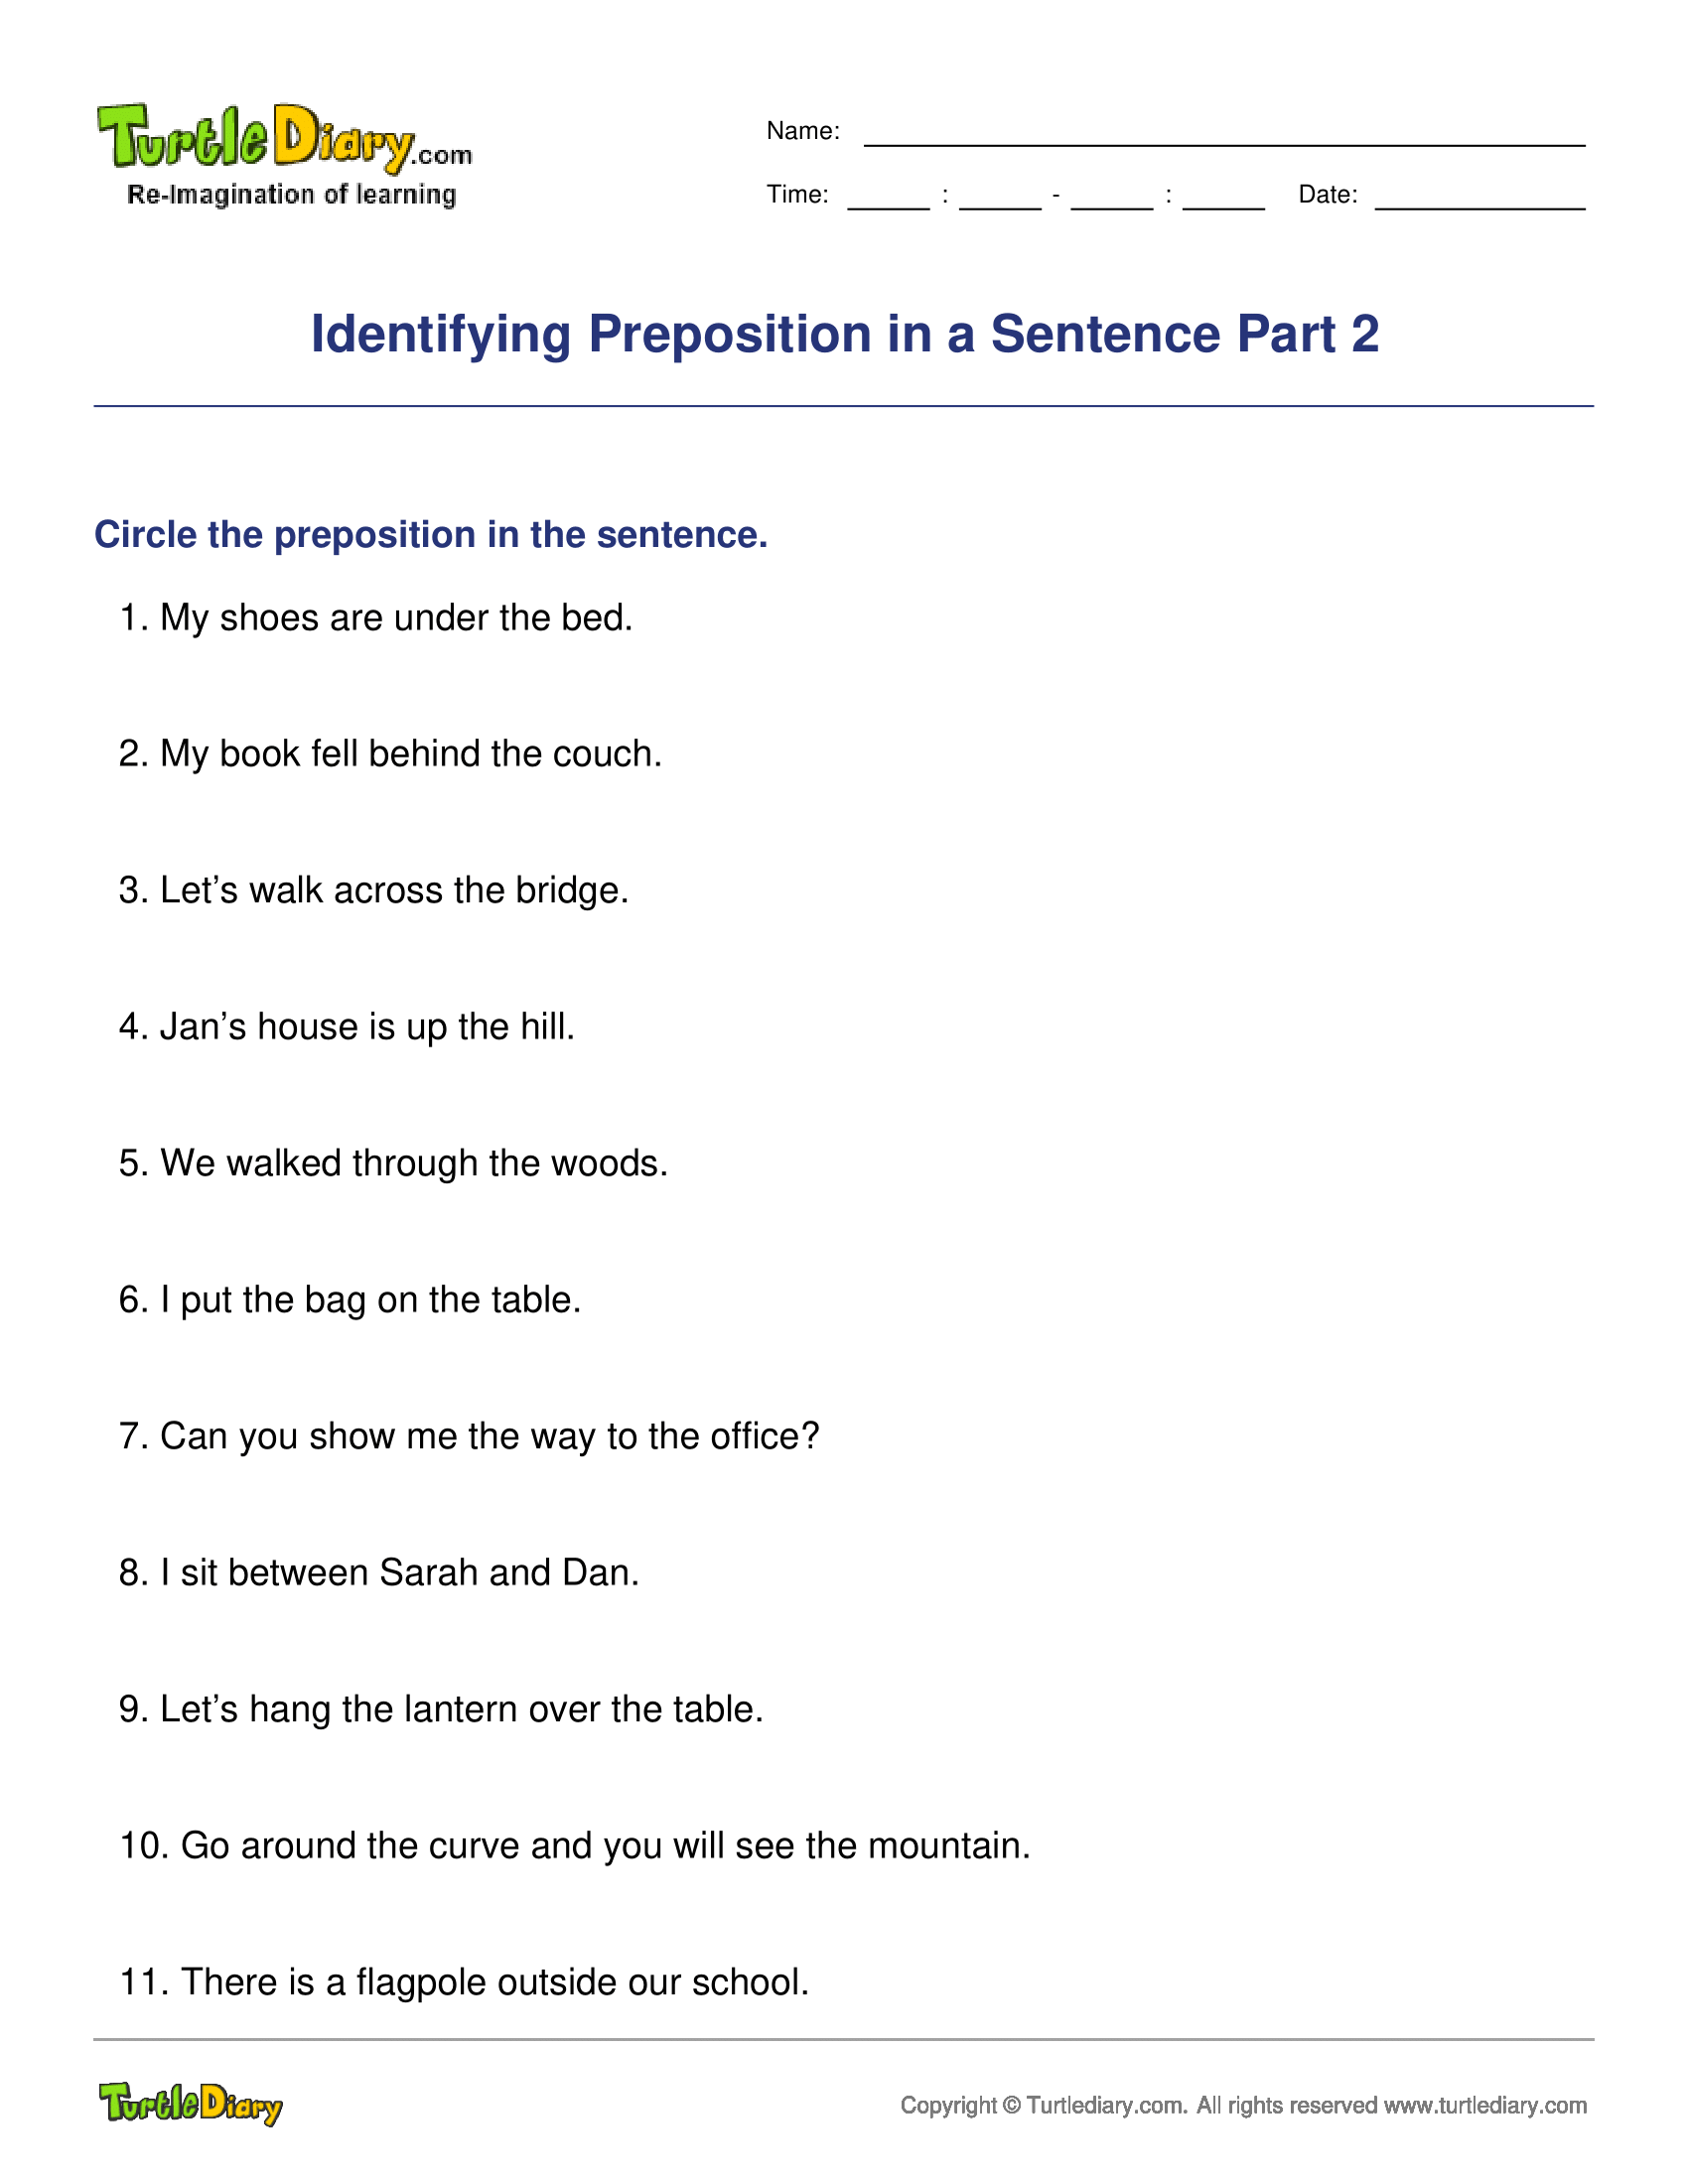 Identifying Preposition in a Sentence Part 2